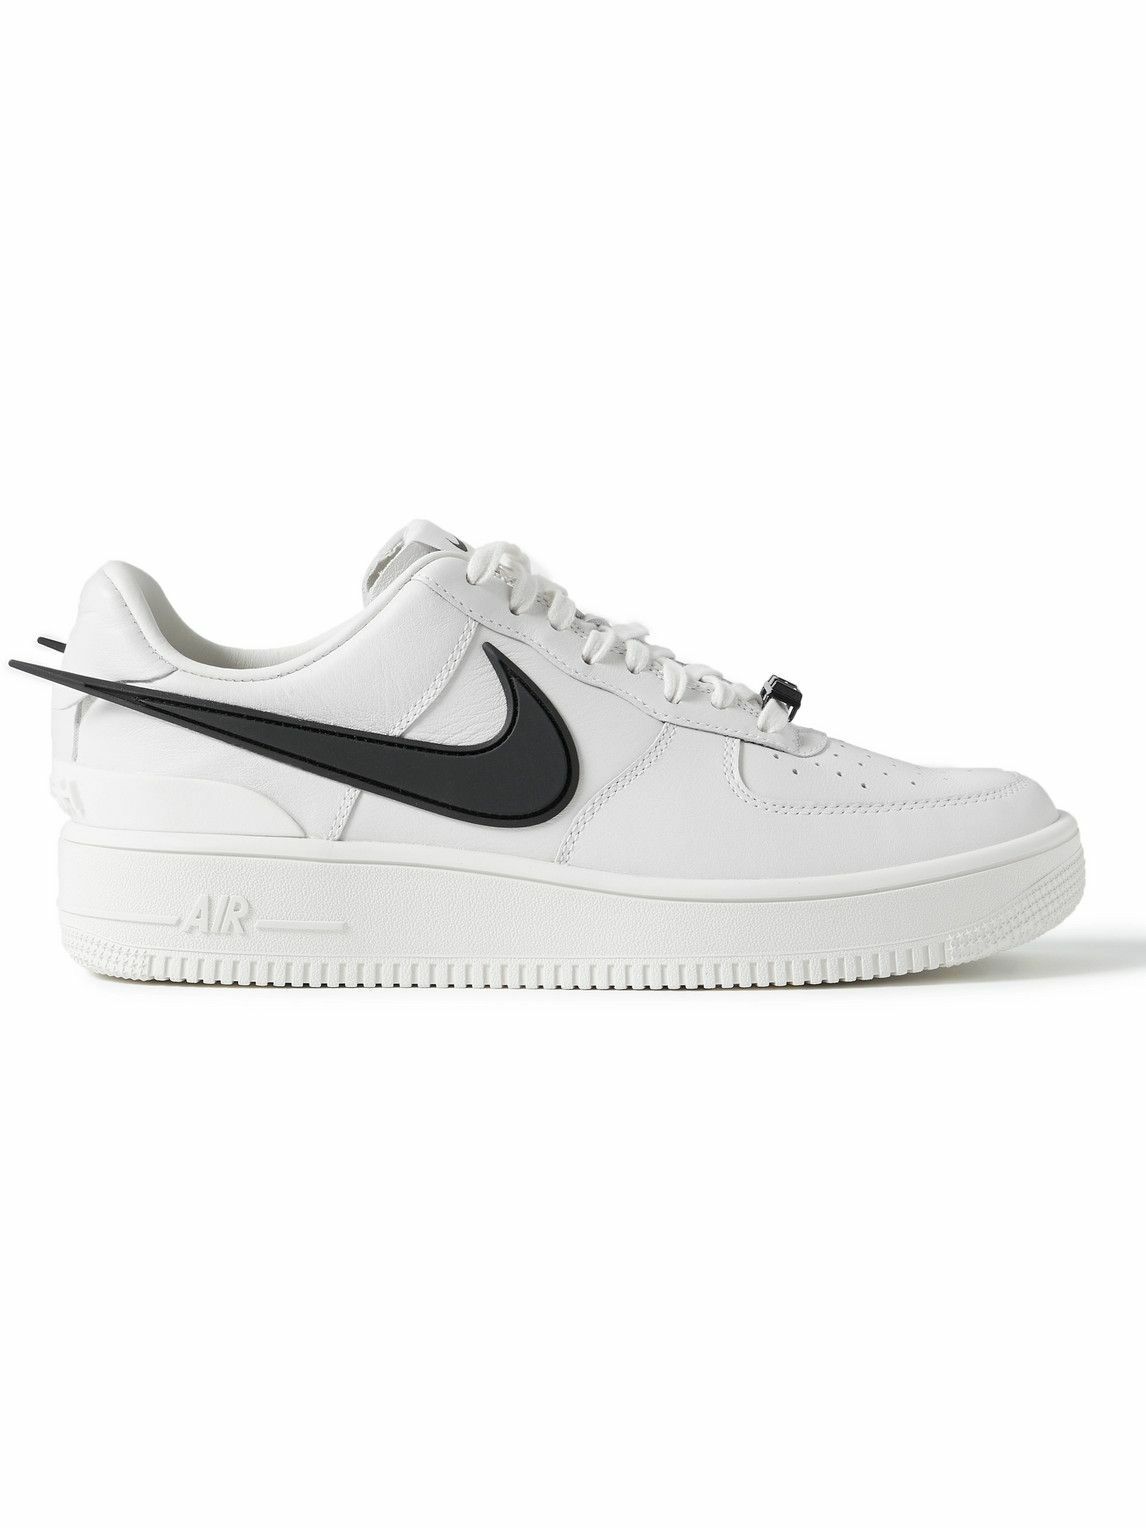 Photo: Nike - AMBUSH Air Force 1 Rubber-Trimmed Leather Sneakers - White